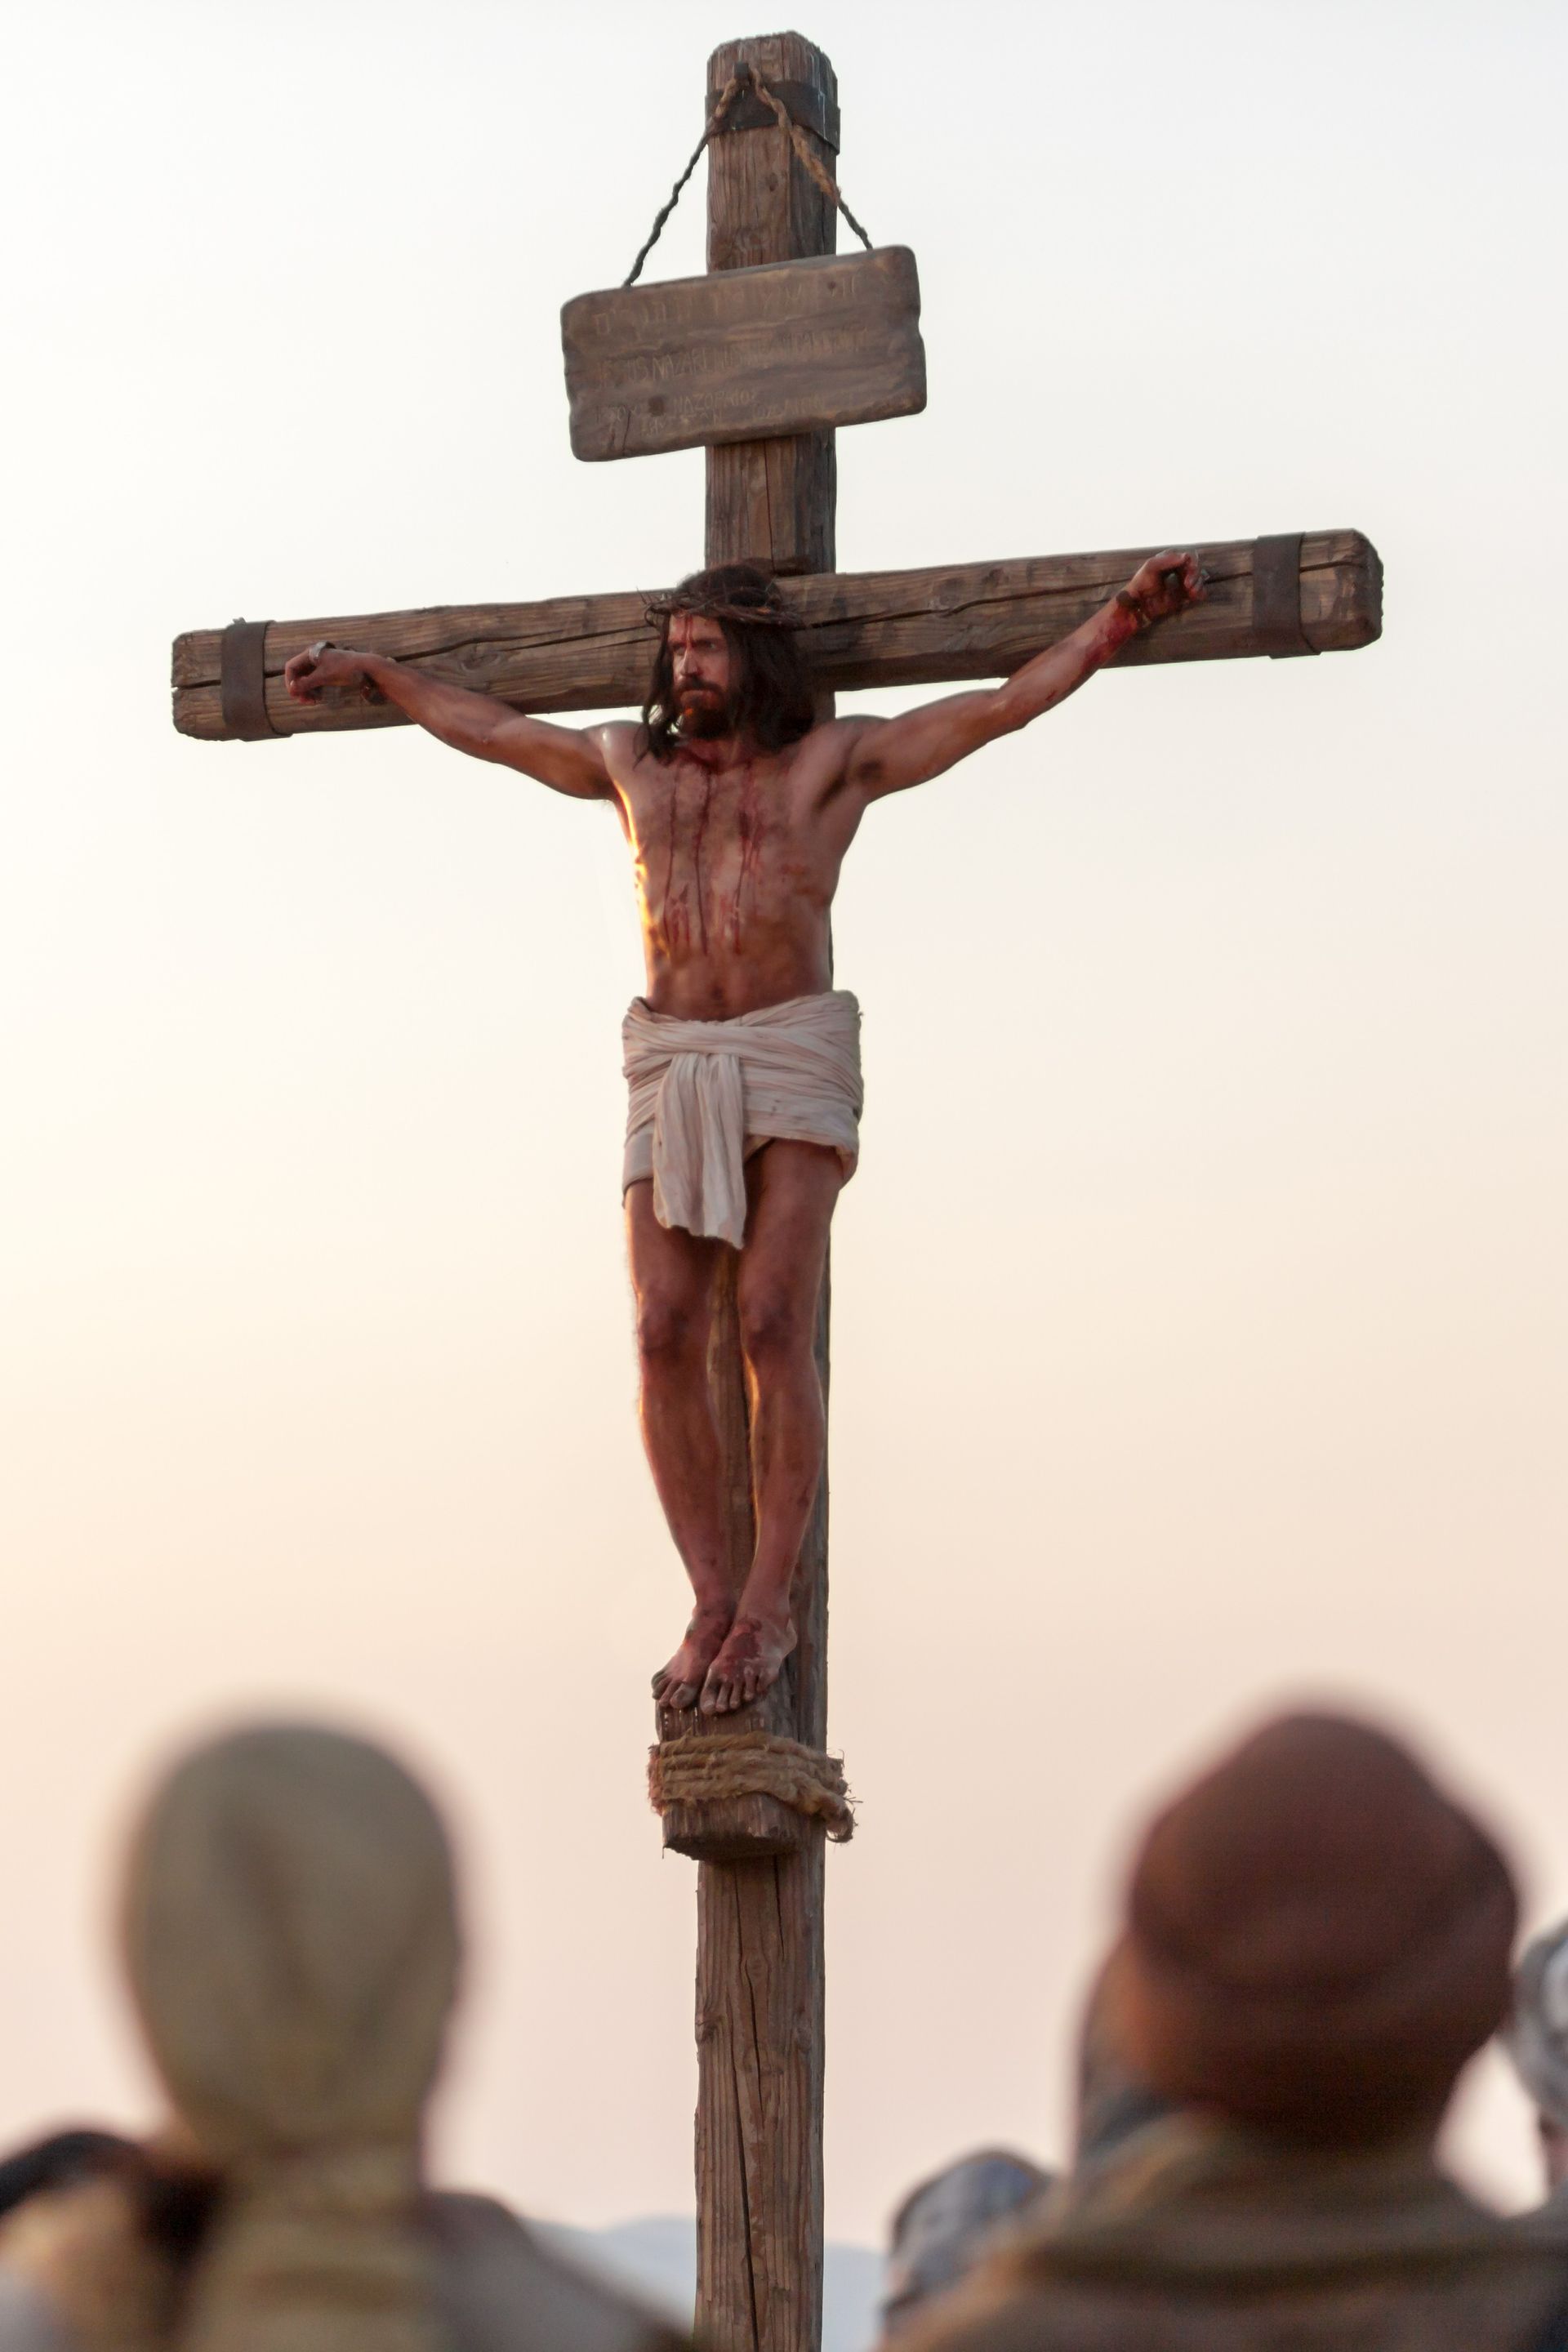 A detail of Jesus Christ on the cross at the time of His death.